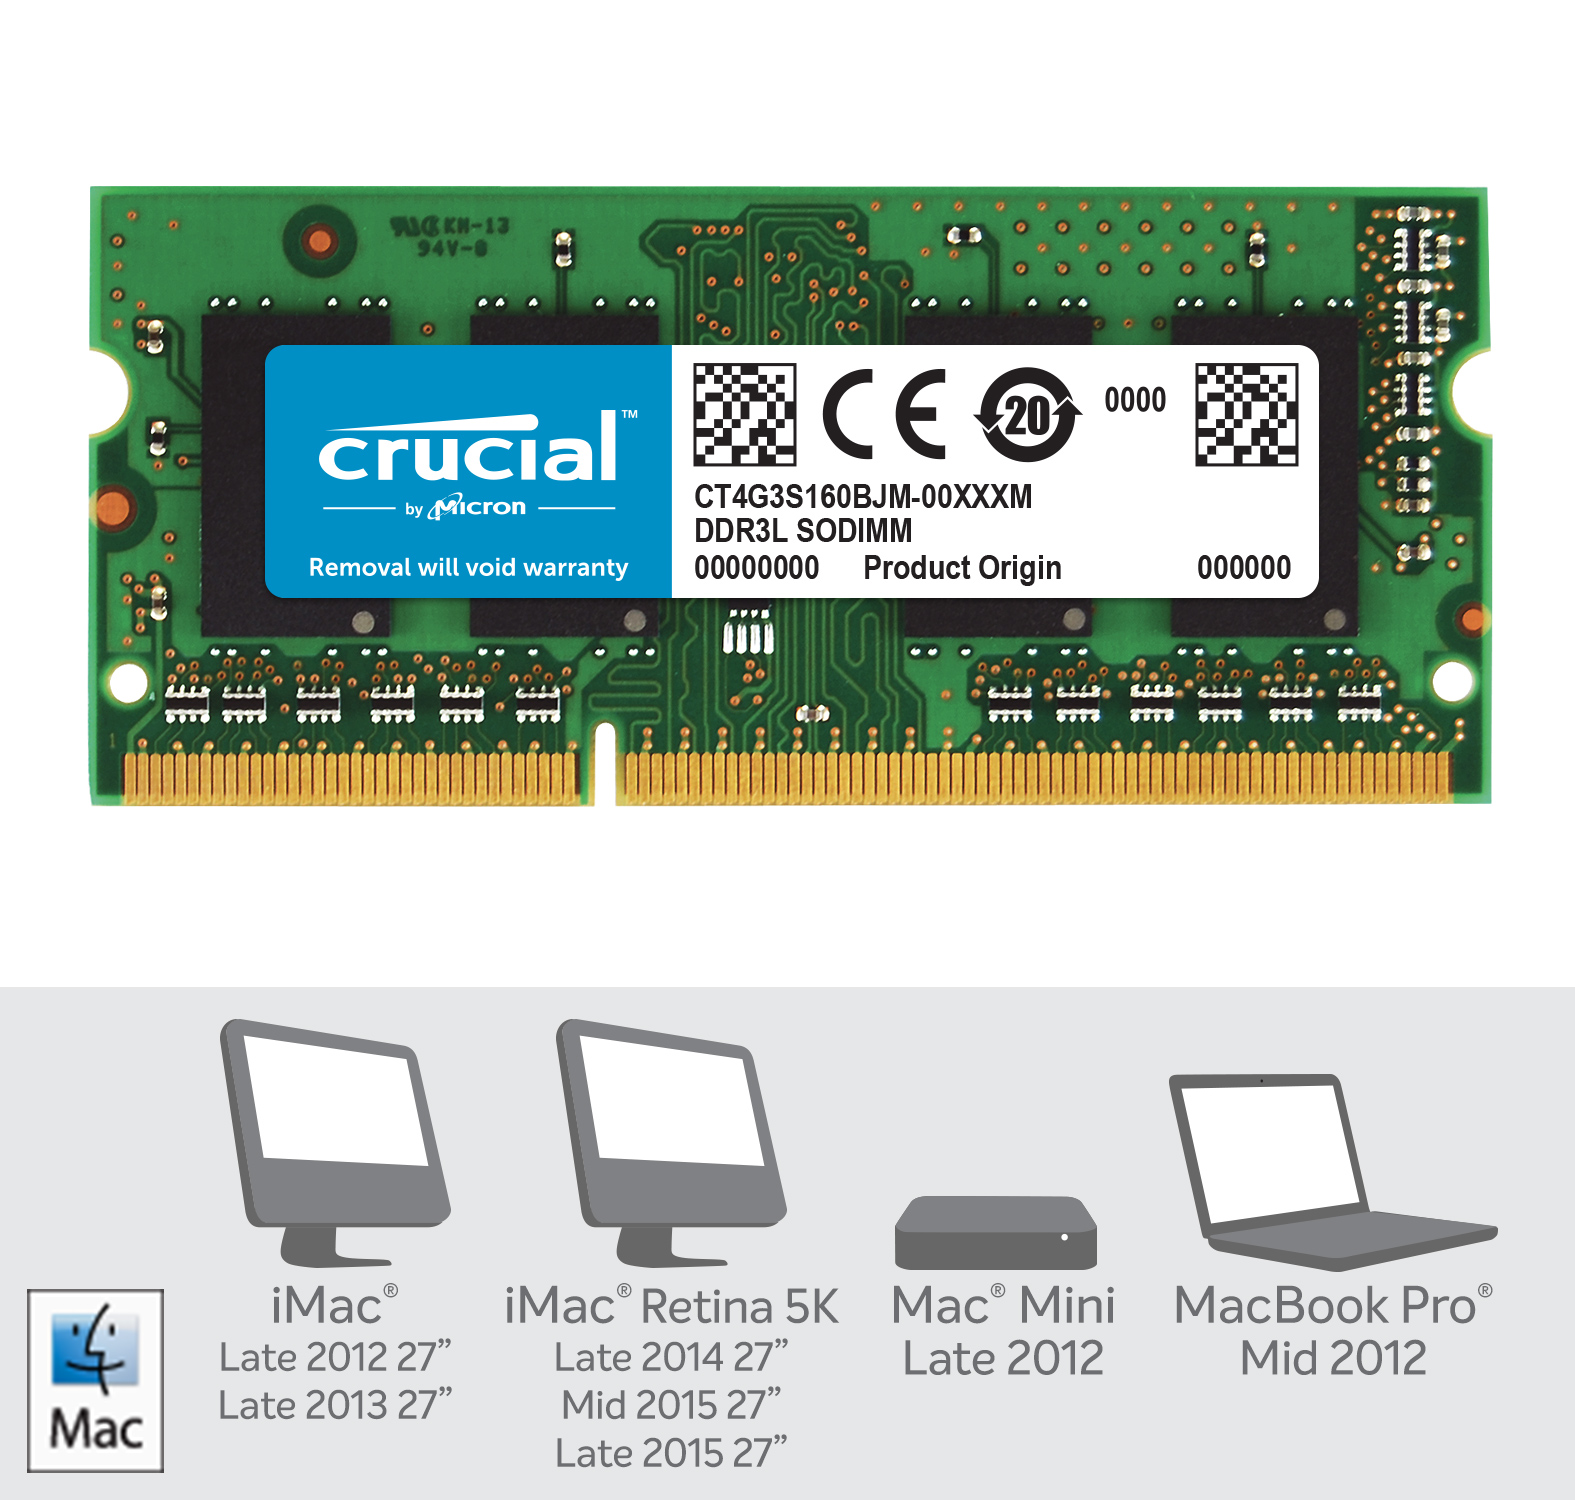 https://www.crucial.com/content/dam/crucial/dram-products/mac/images/compatibility/CT4G3S160BJM-crucial-memory-for-mac-compatibility-image.jpg